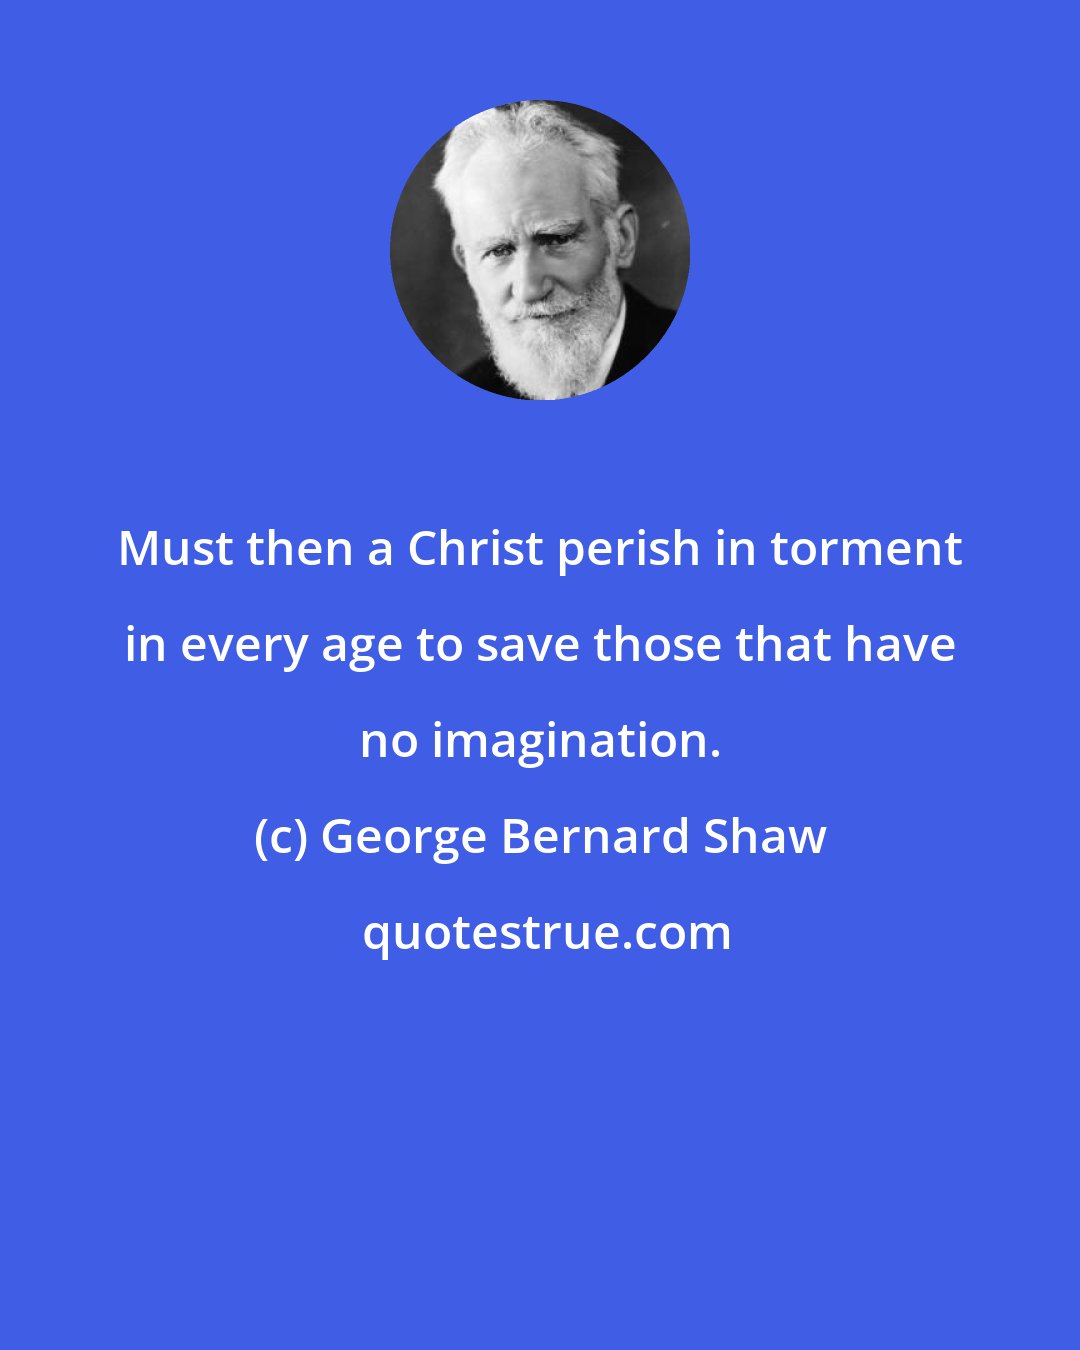 George Bernard Shaw: Must then a Christ perish in torment in every age to save those that have no imagination.